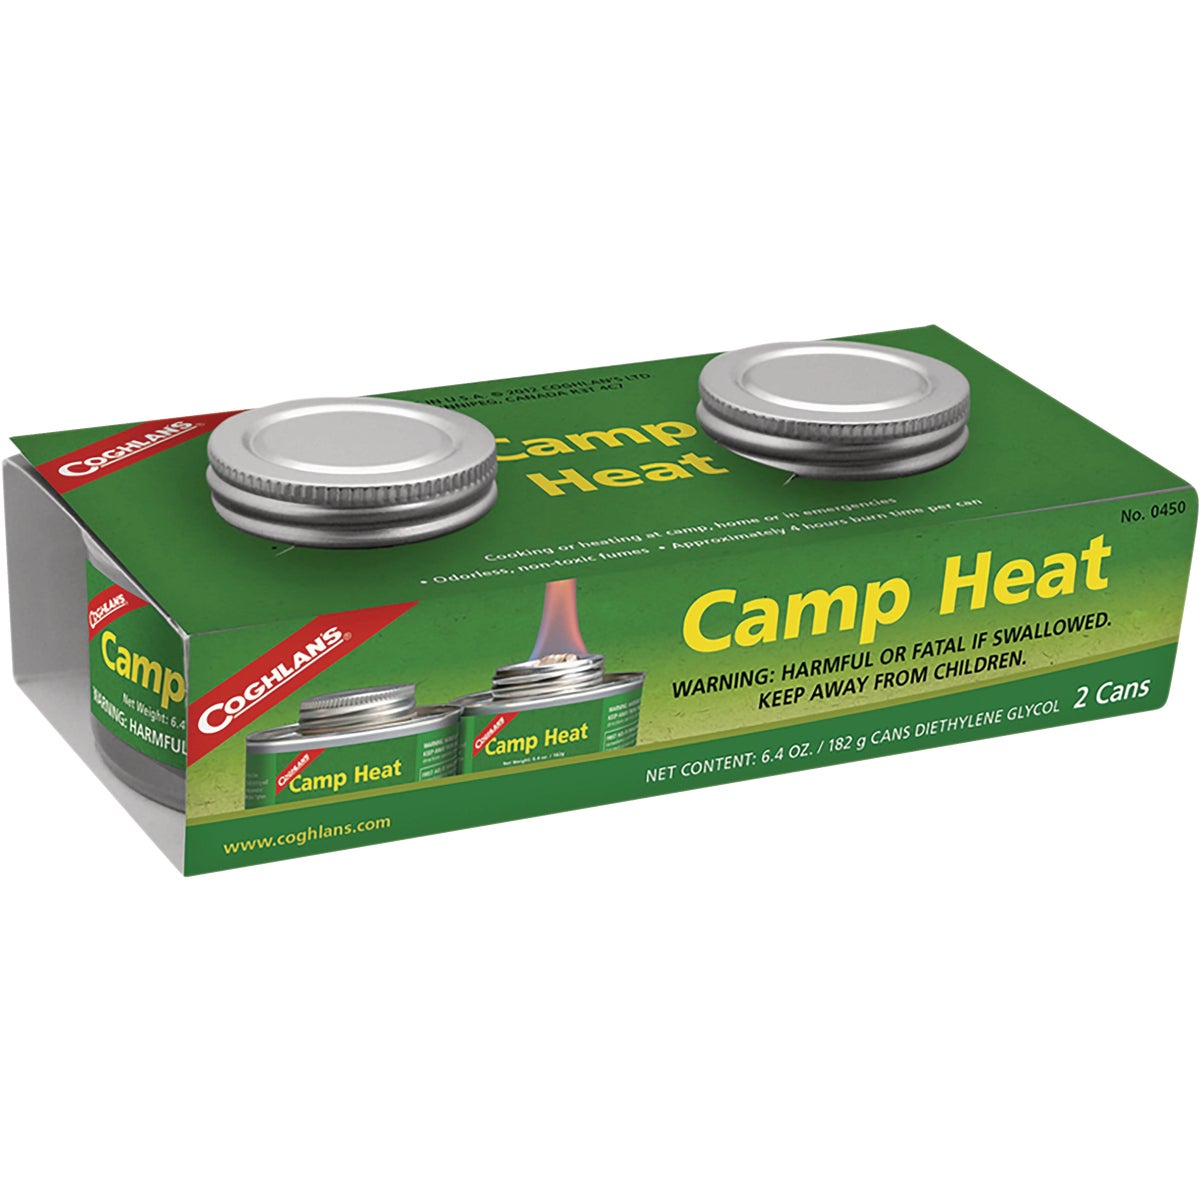 Coghlans Camp Heat 6.4 Oz. Canned Cooking Fuel (2-Pack)